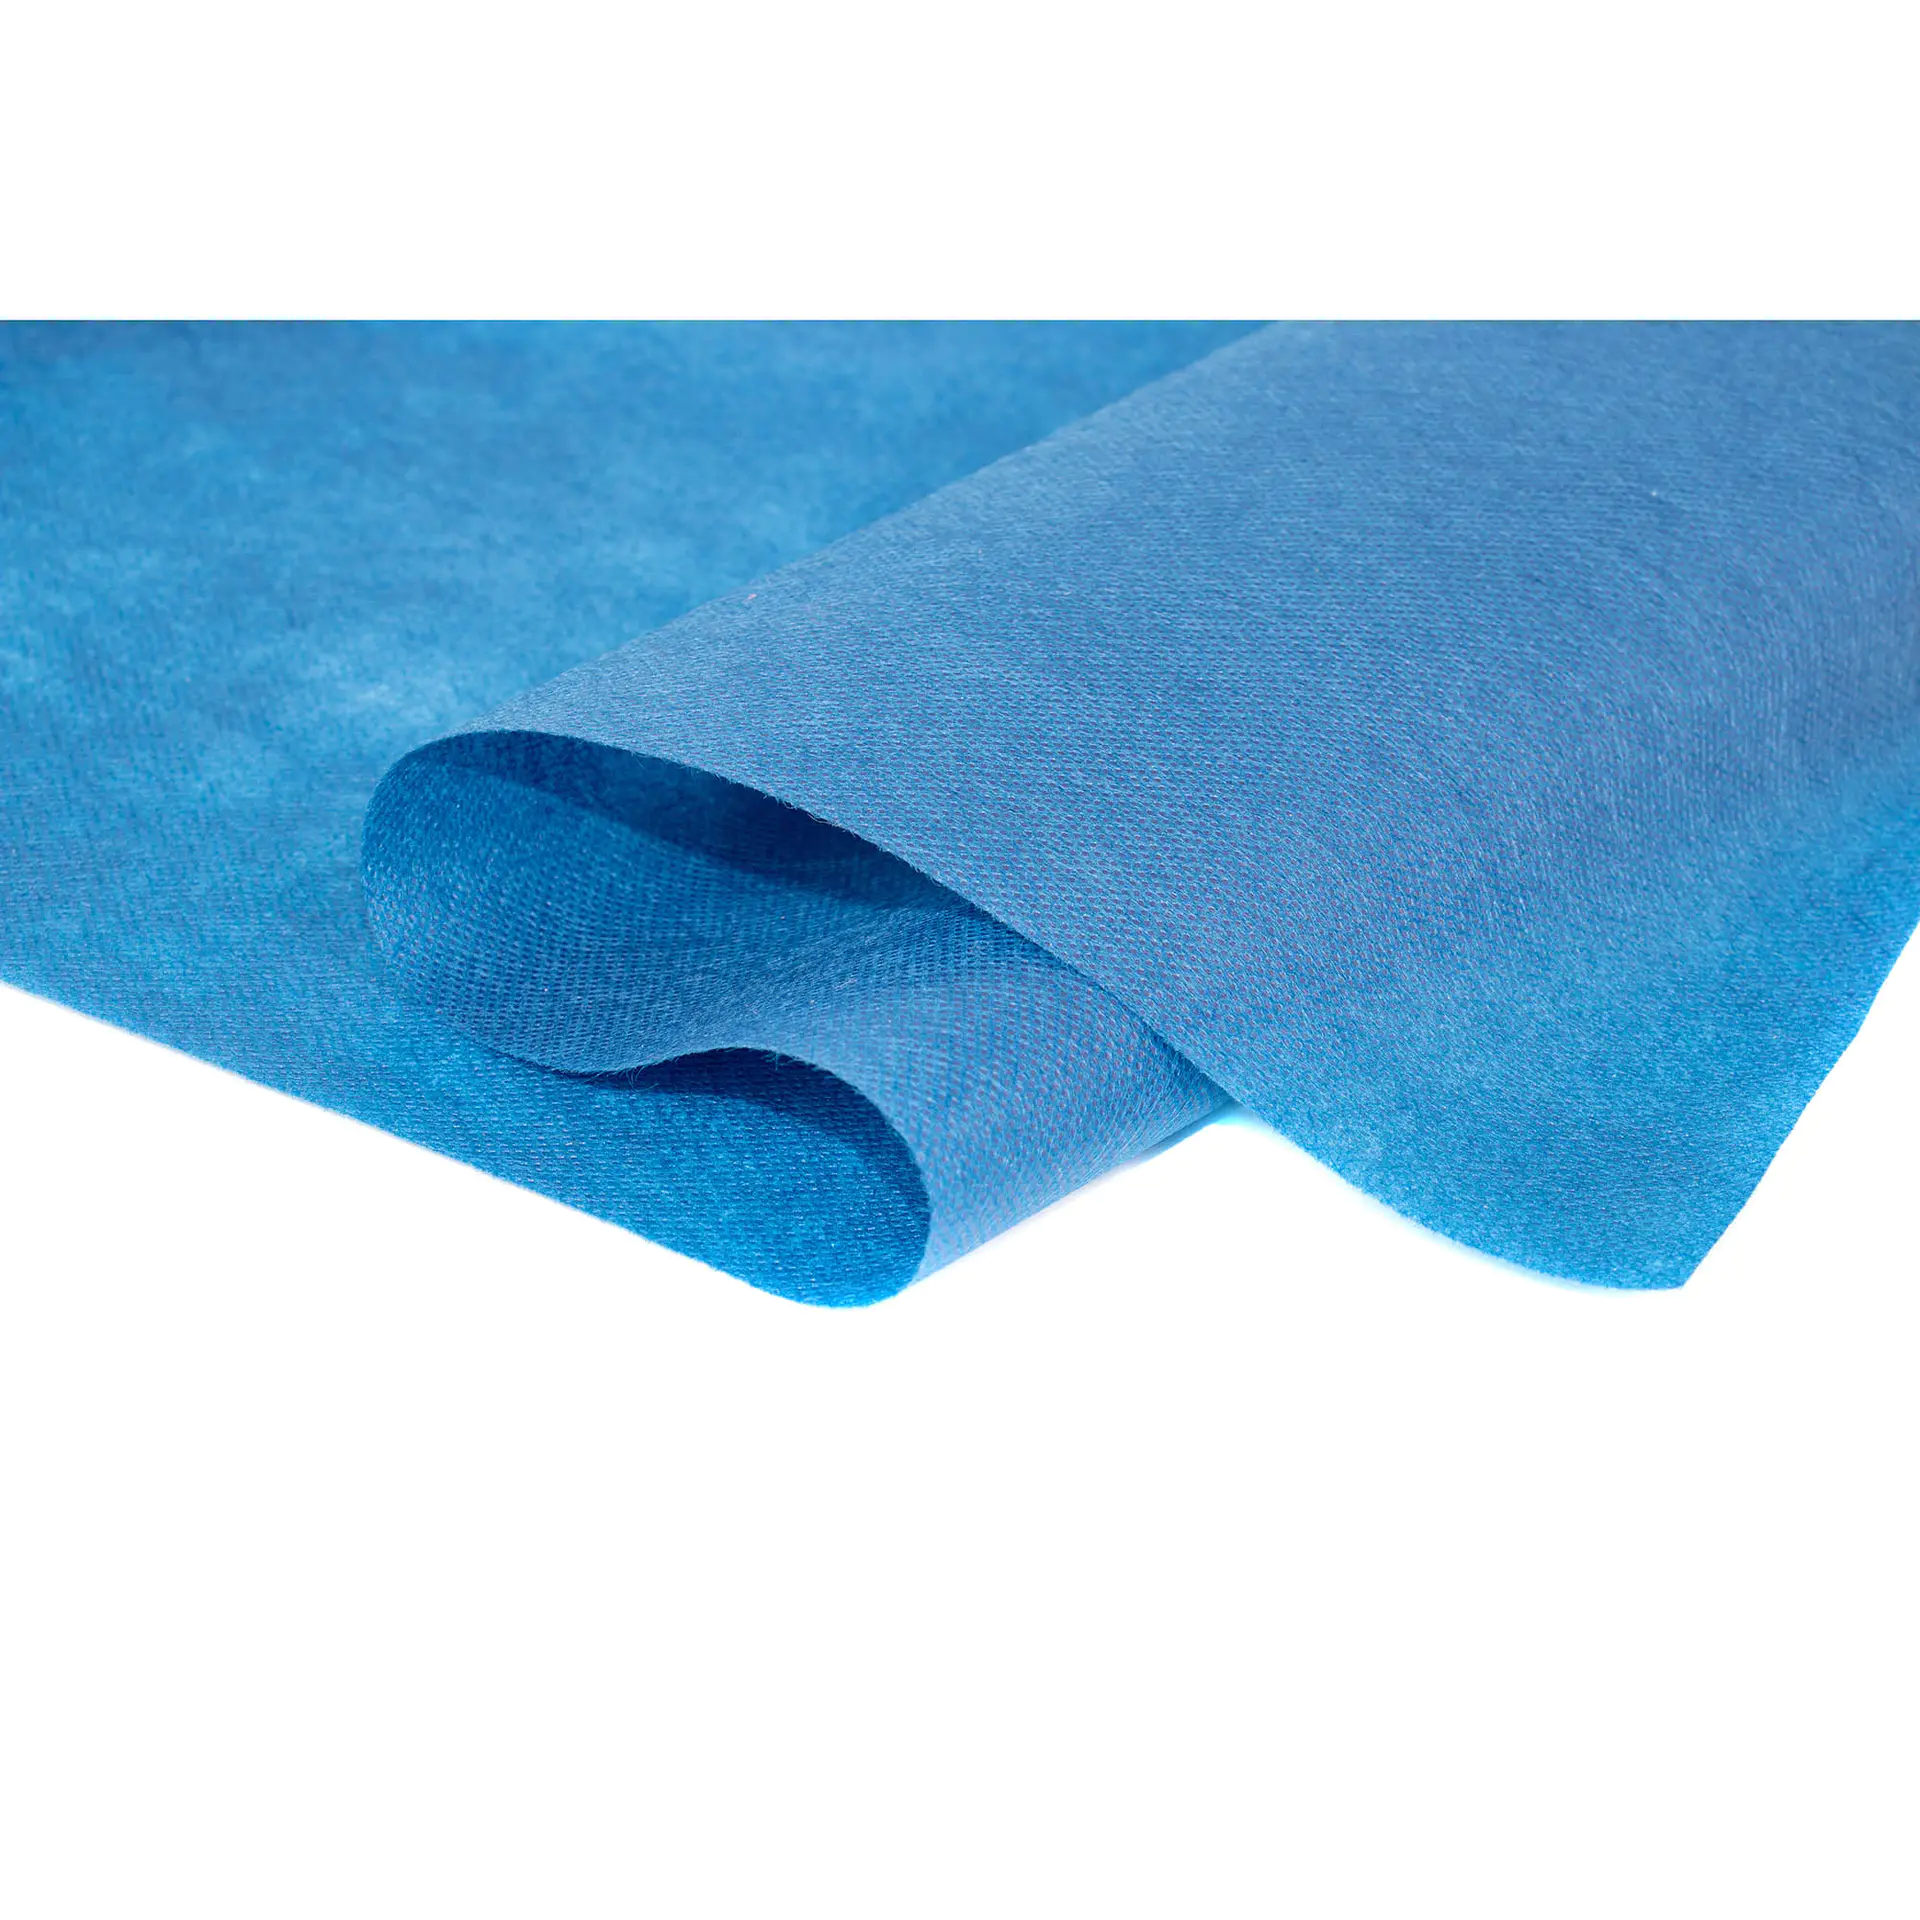 SMS/SMMS Nonwoven Fabric 45gsm Medical Gown Fabric Material made in China